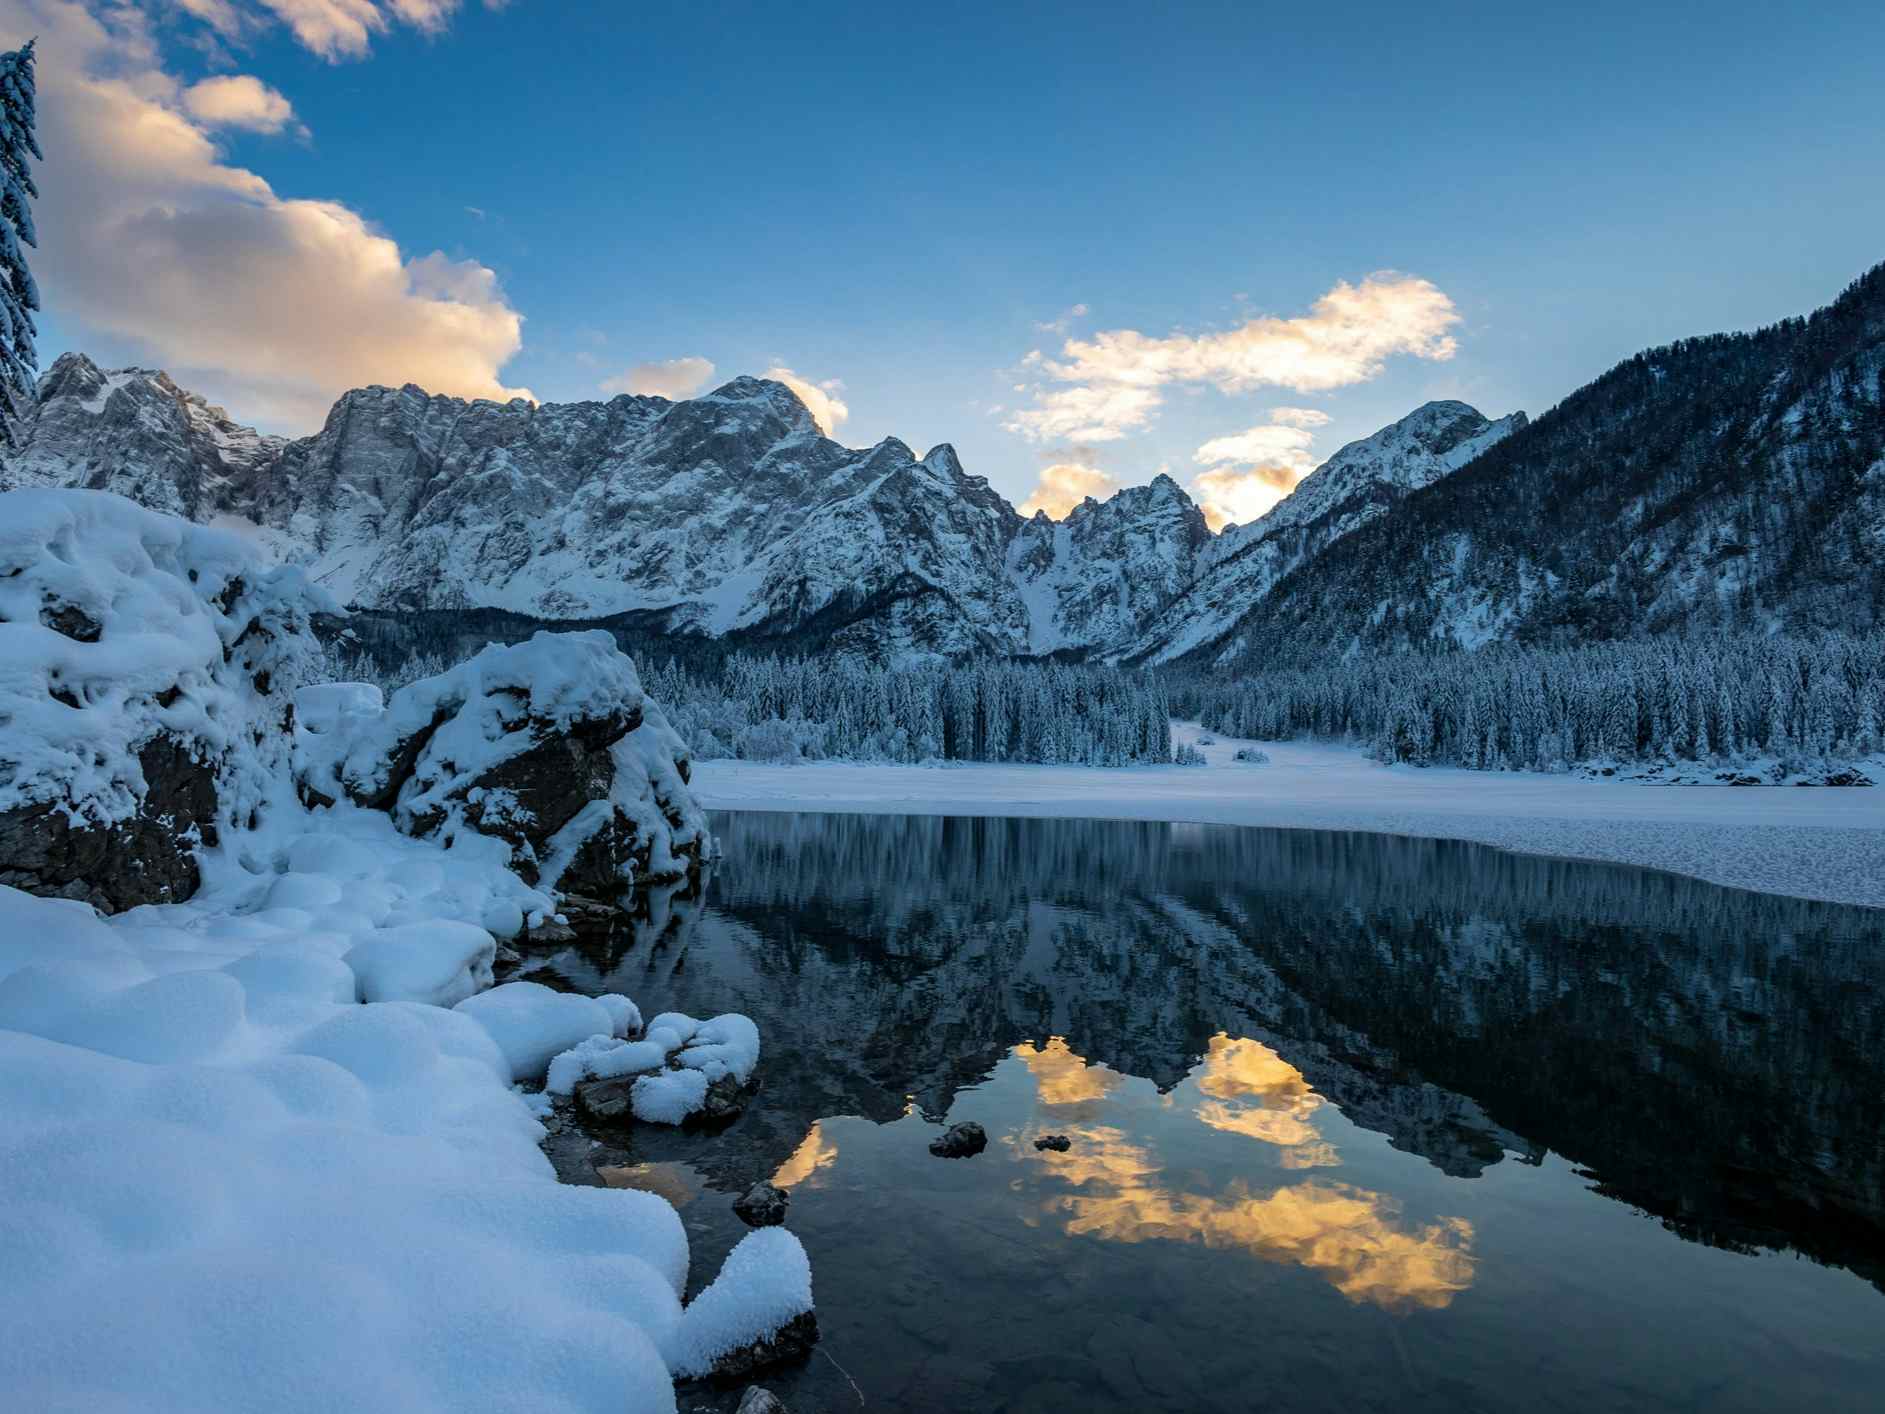 Blue skies and snowy landscapes by Fusine Lake.